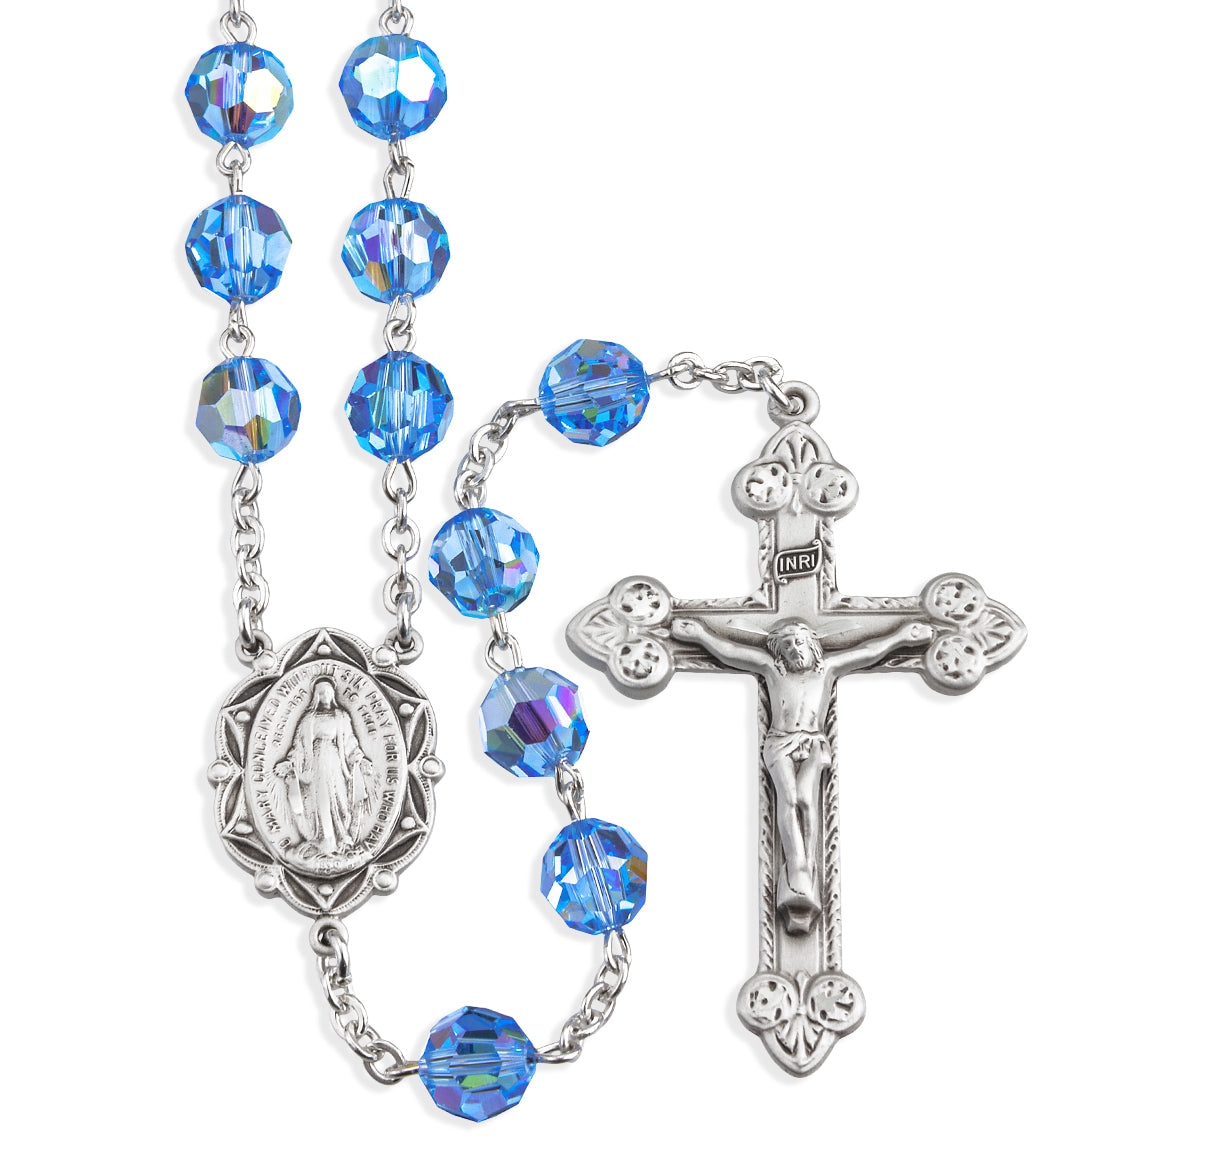 Sterling Silver Rosary Hand Made with Swarovski Crystal 8mm Light Sapphire Beads by HMH